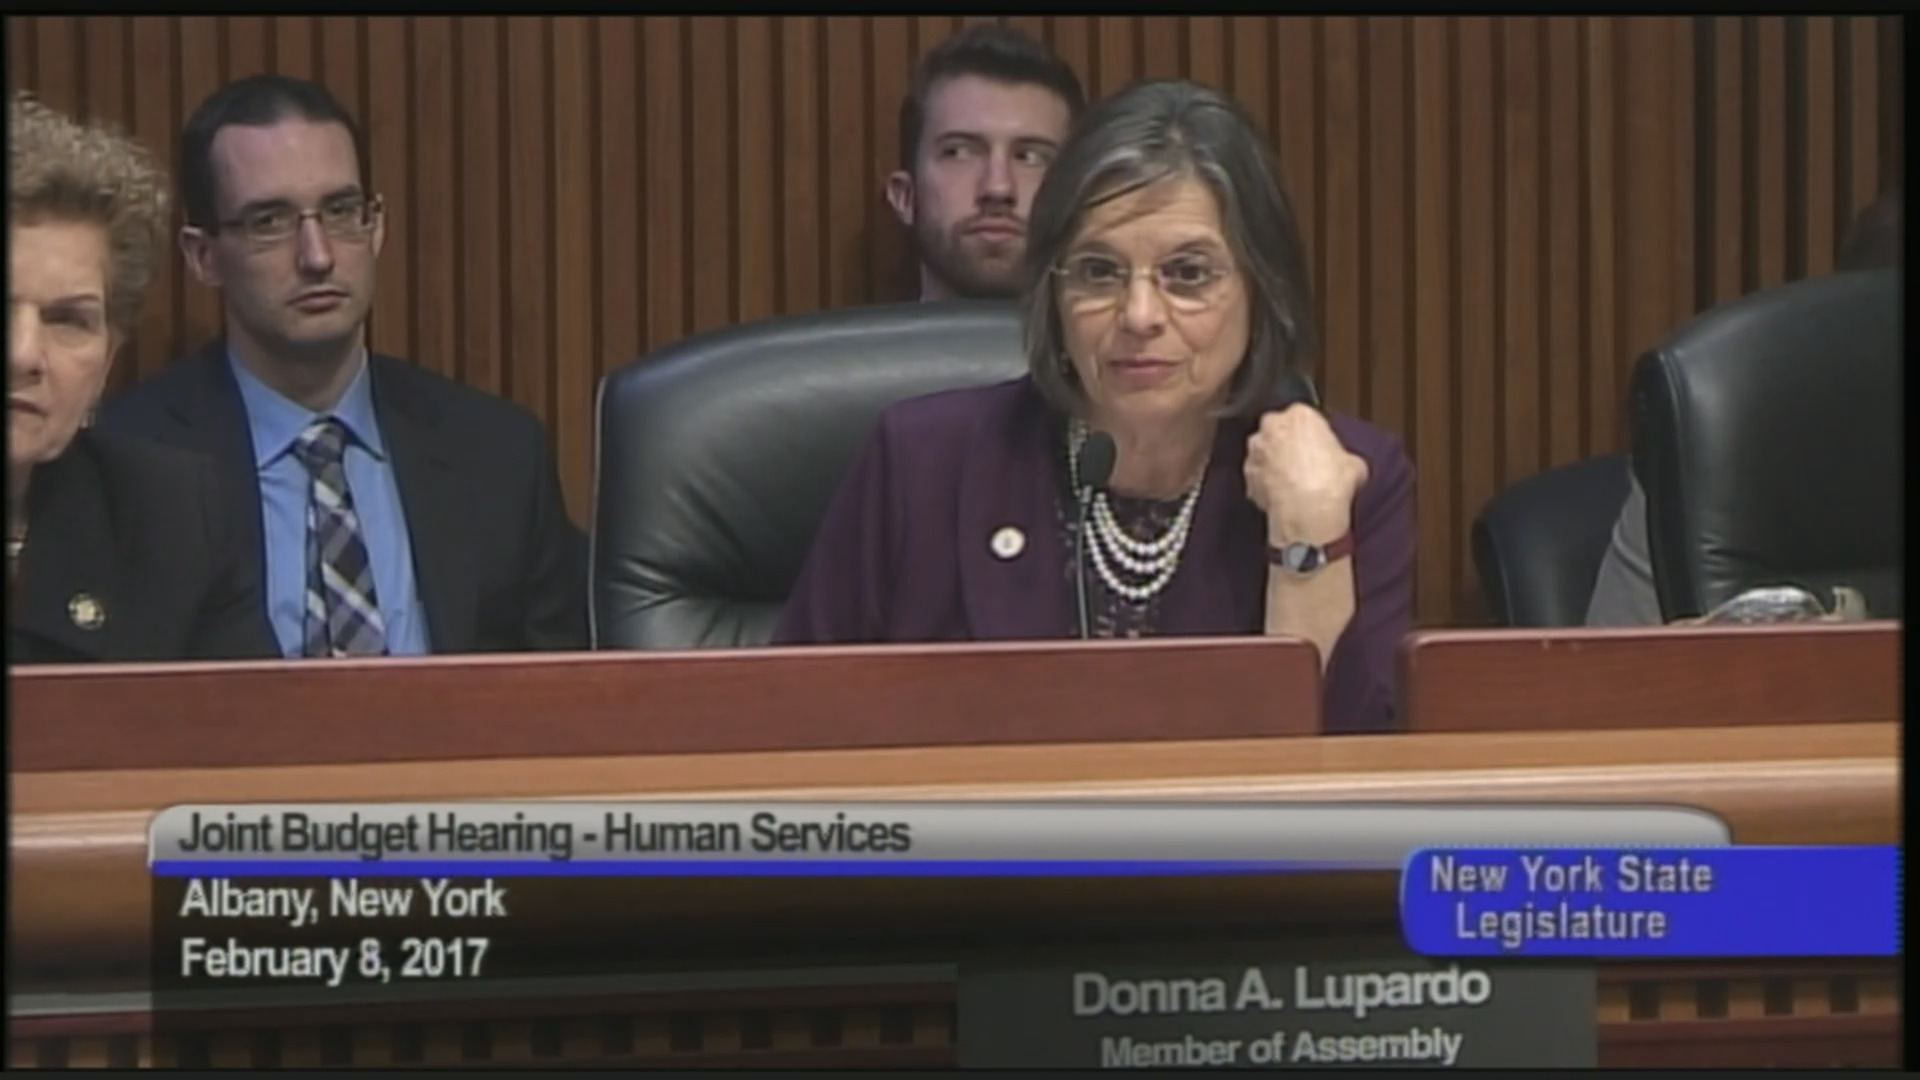 Assembly-Senate Budget Hearing On Human Services